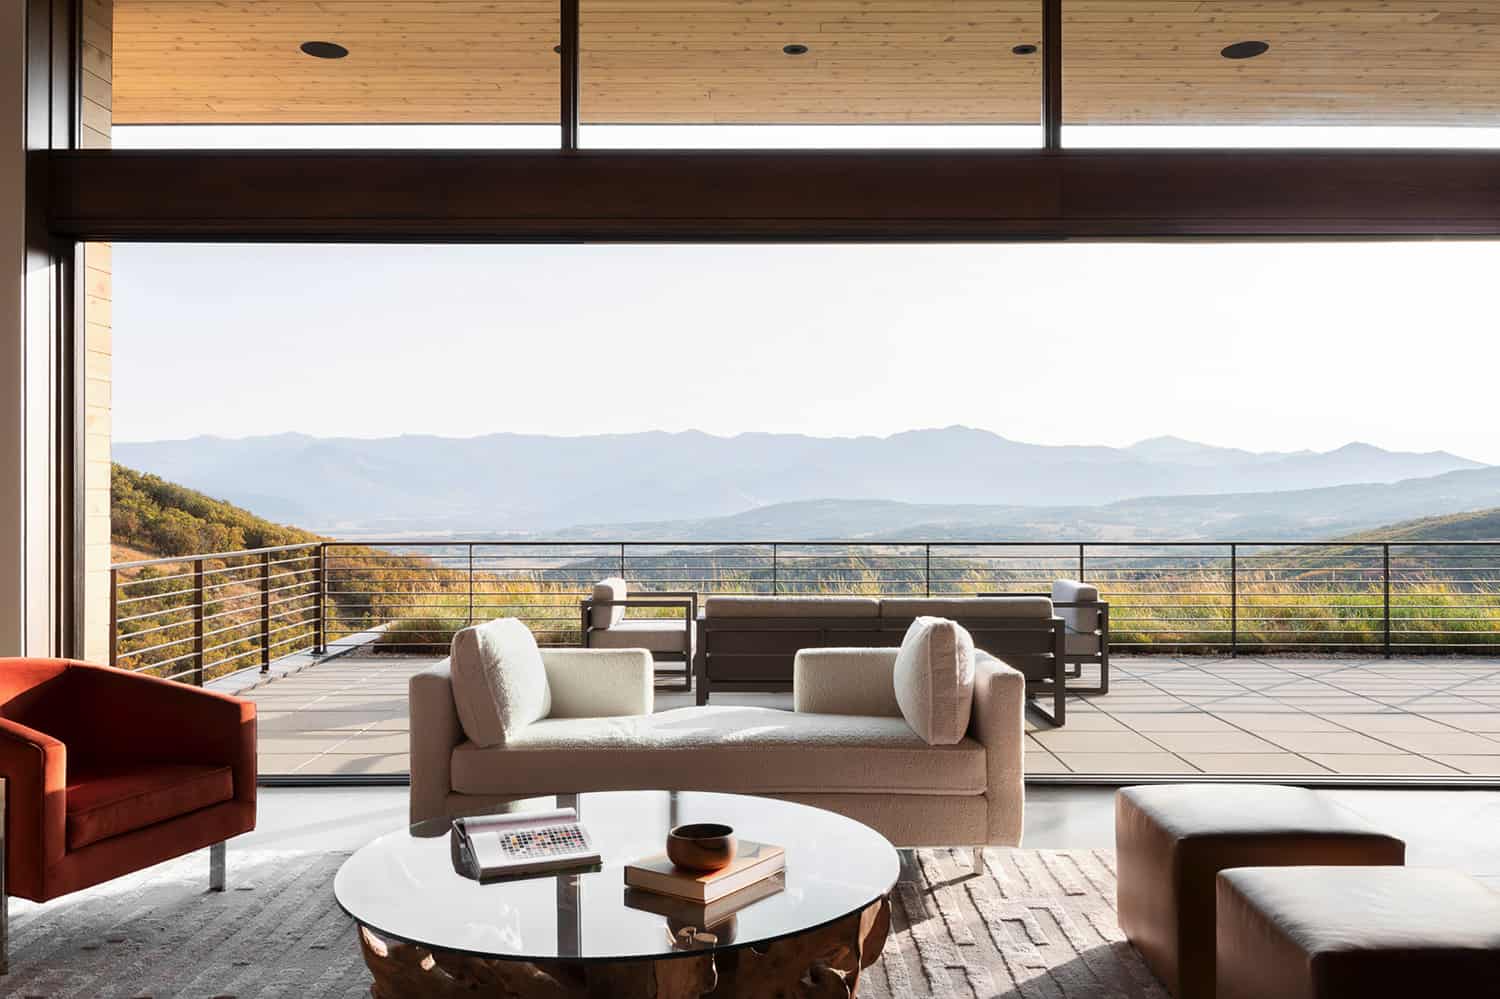 Step inside this mountainside home with amazing views of Park City, Utah